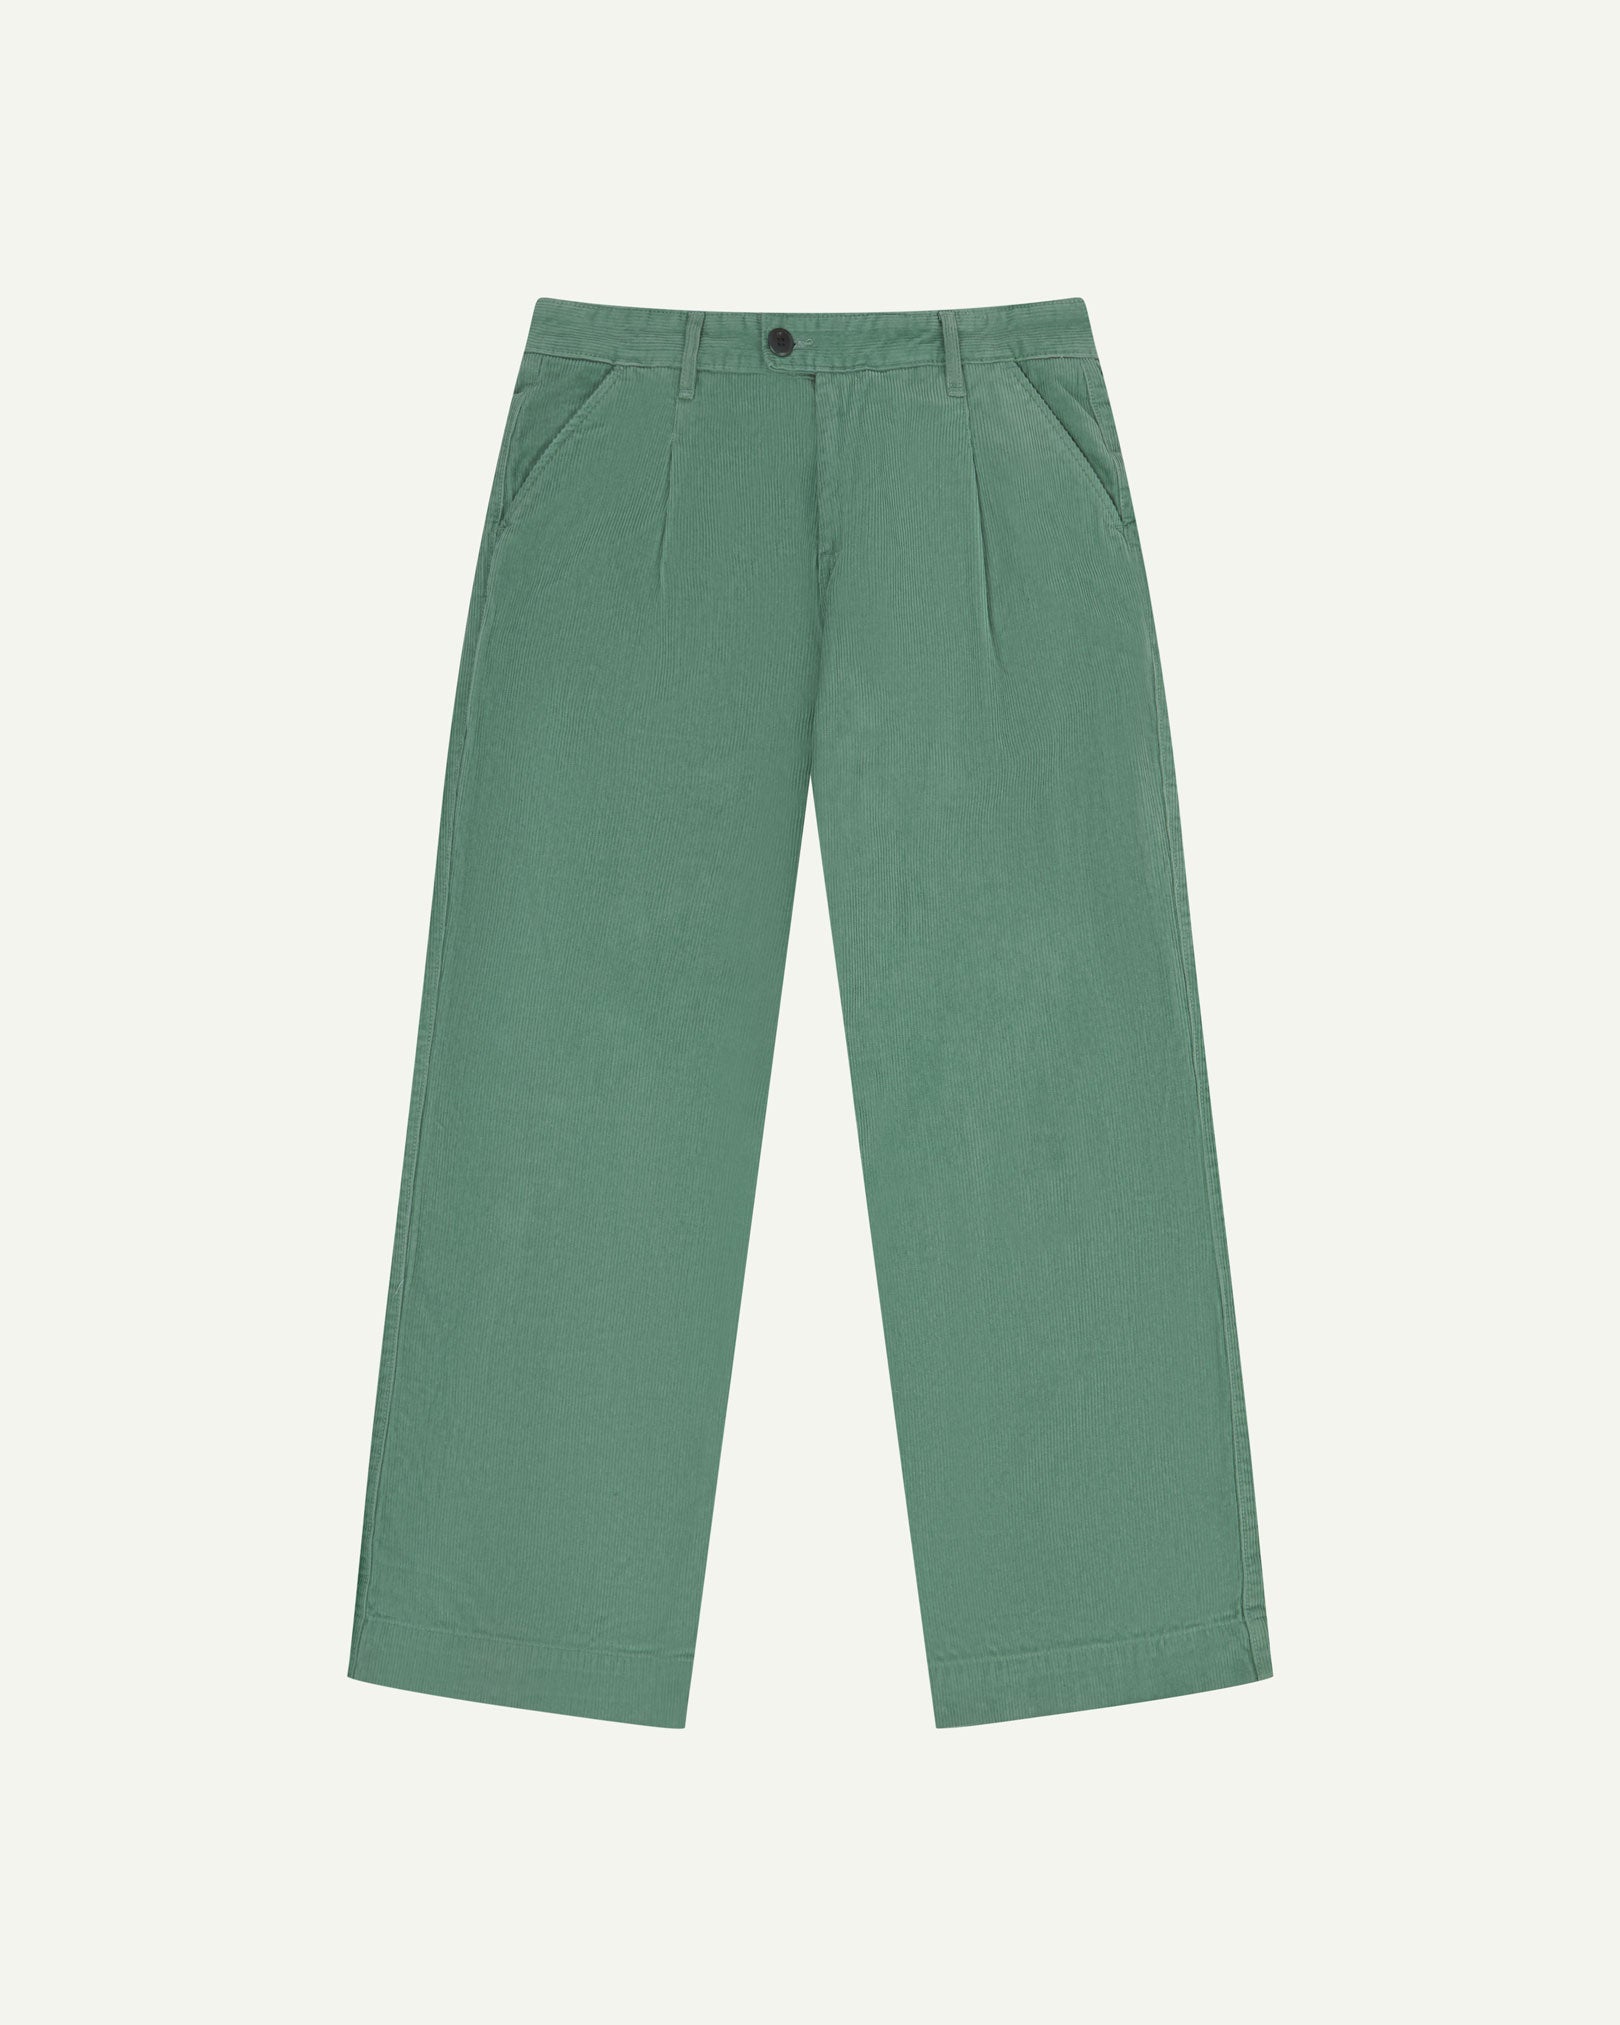 Front flat view of Uskees cord boat pants in eucalyptus. Showing Corozo button fastening and wide leg fit.